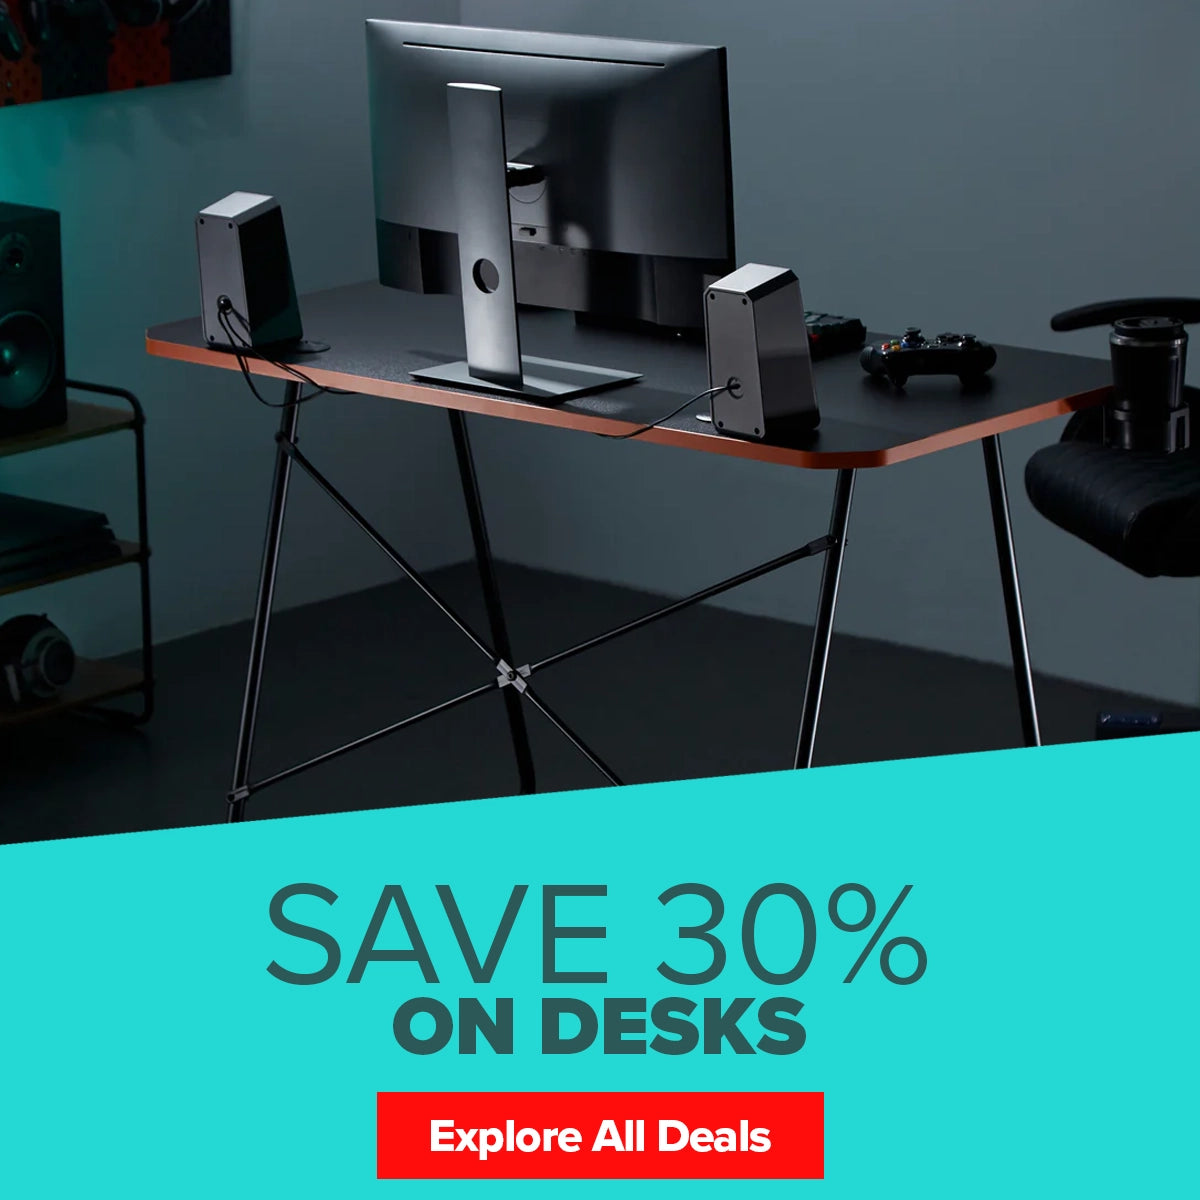 Save 30% off desks this Father's Day at Maplin